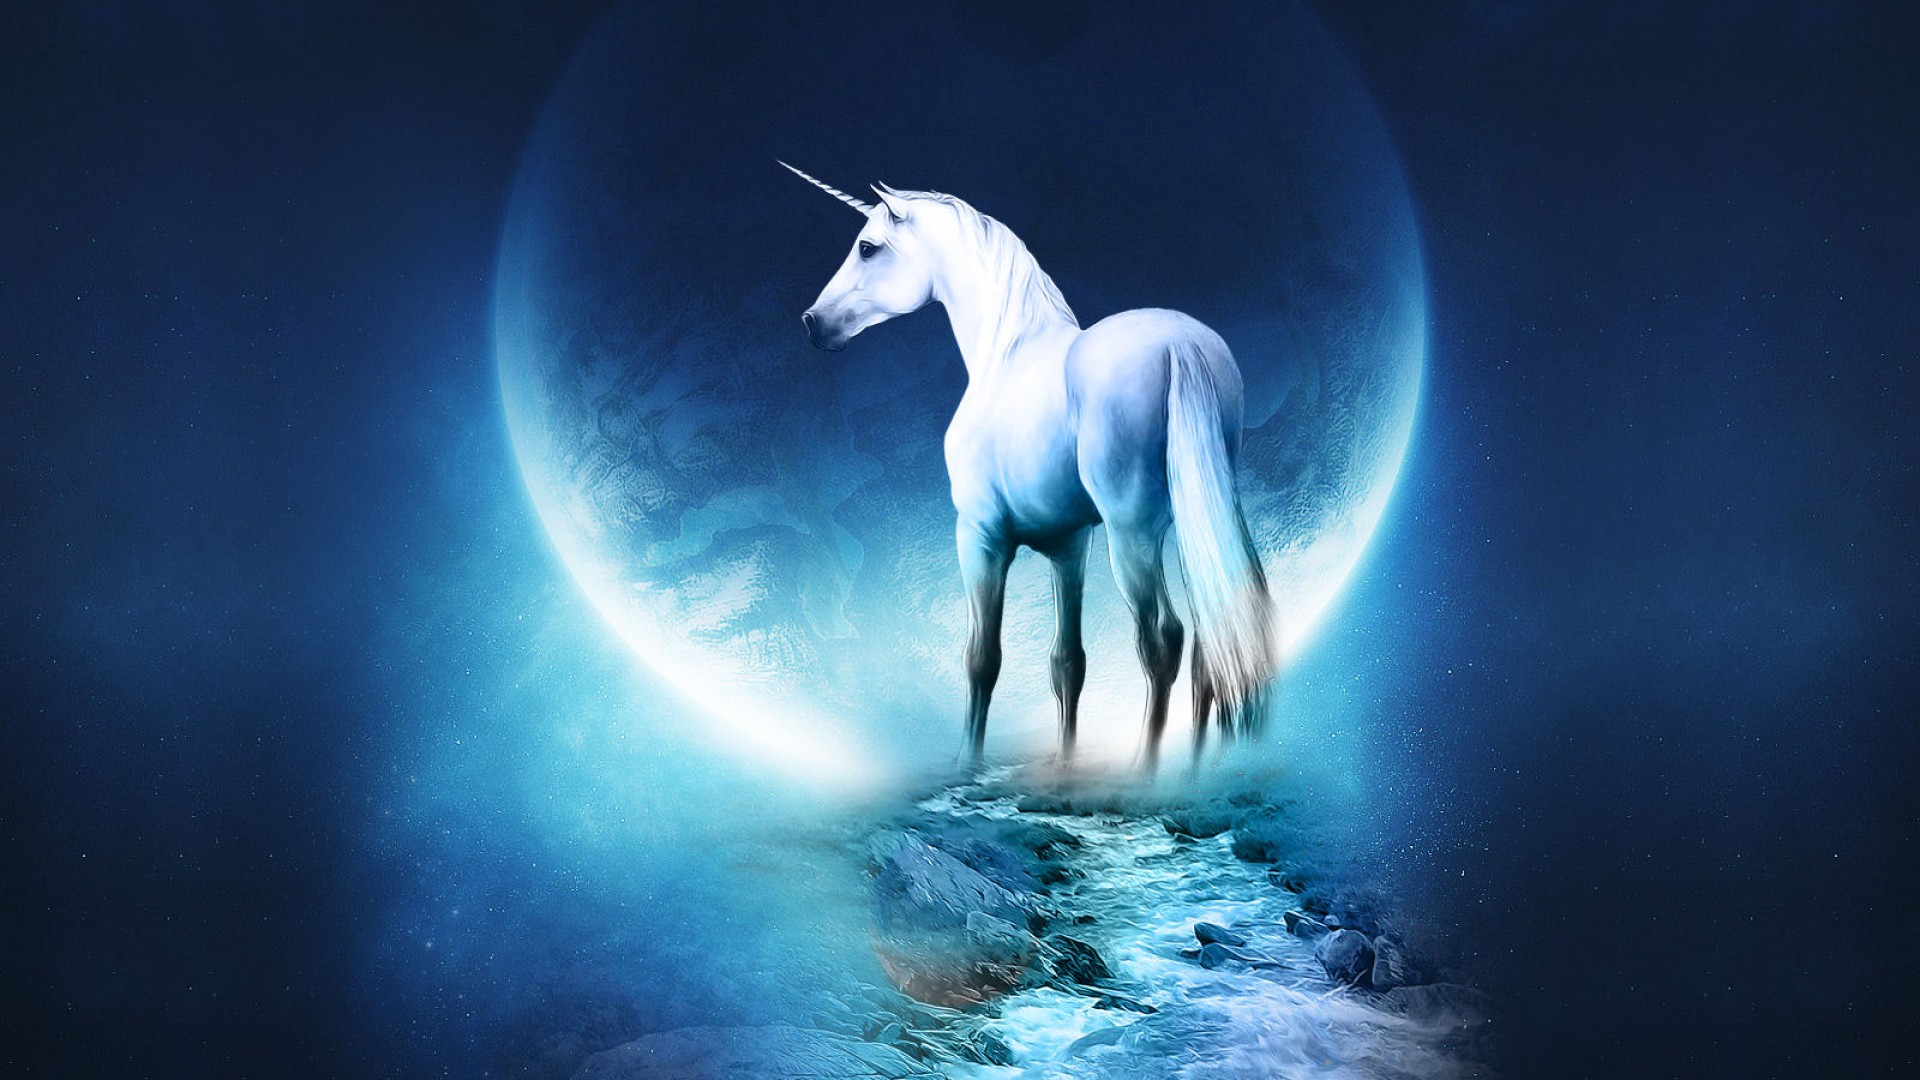 High Resolution Awesome Fantasy Unicorn Wallpaper HD 1 Full Size ...